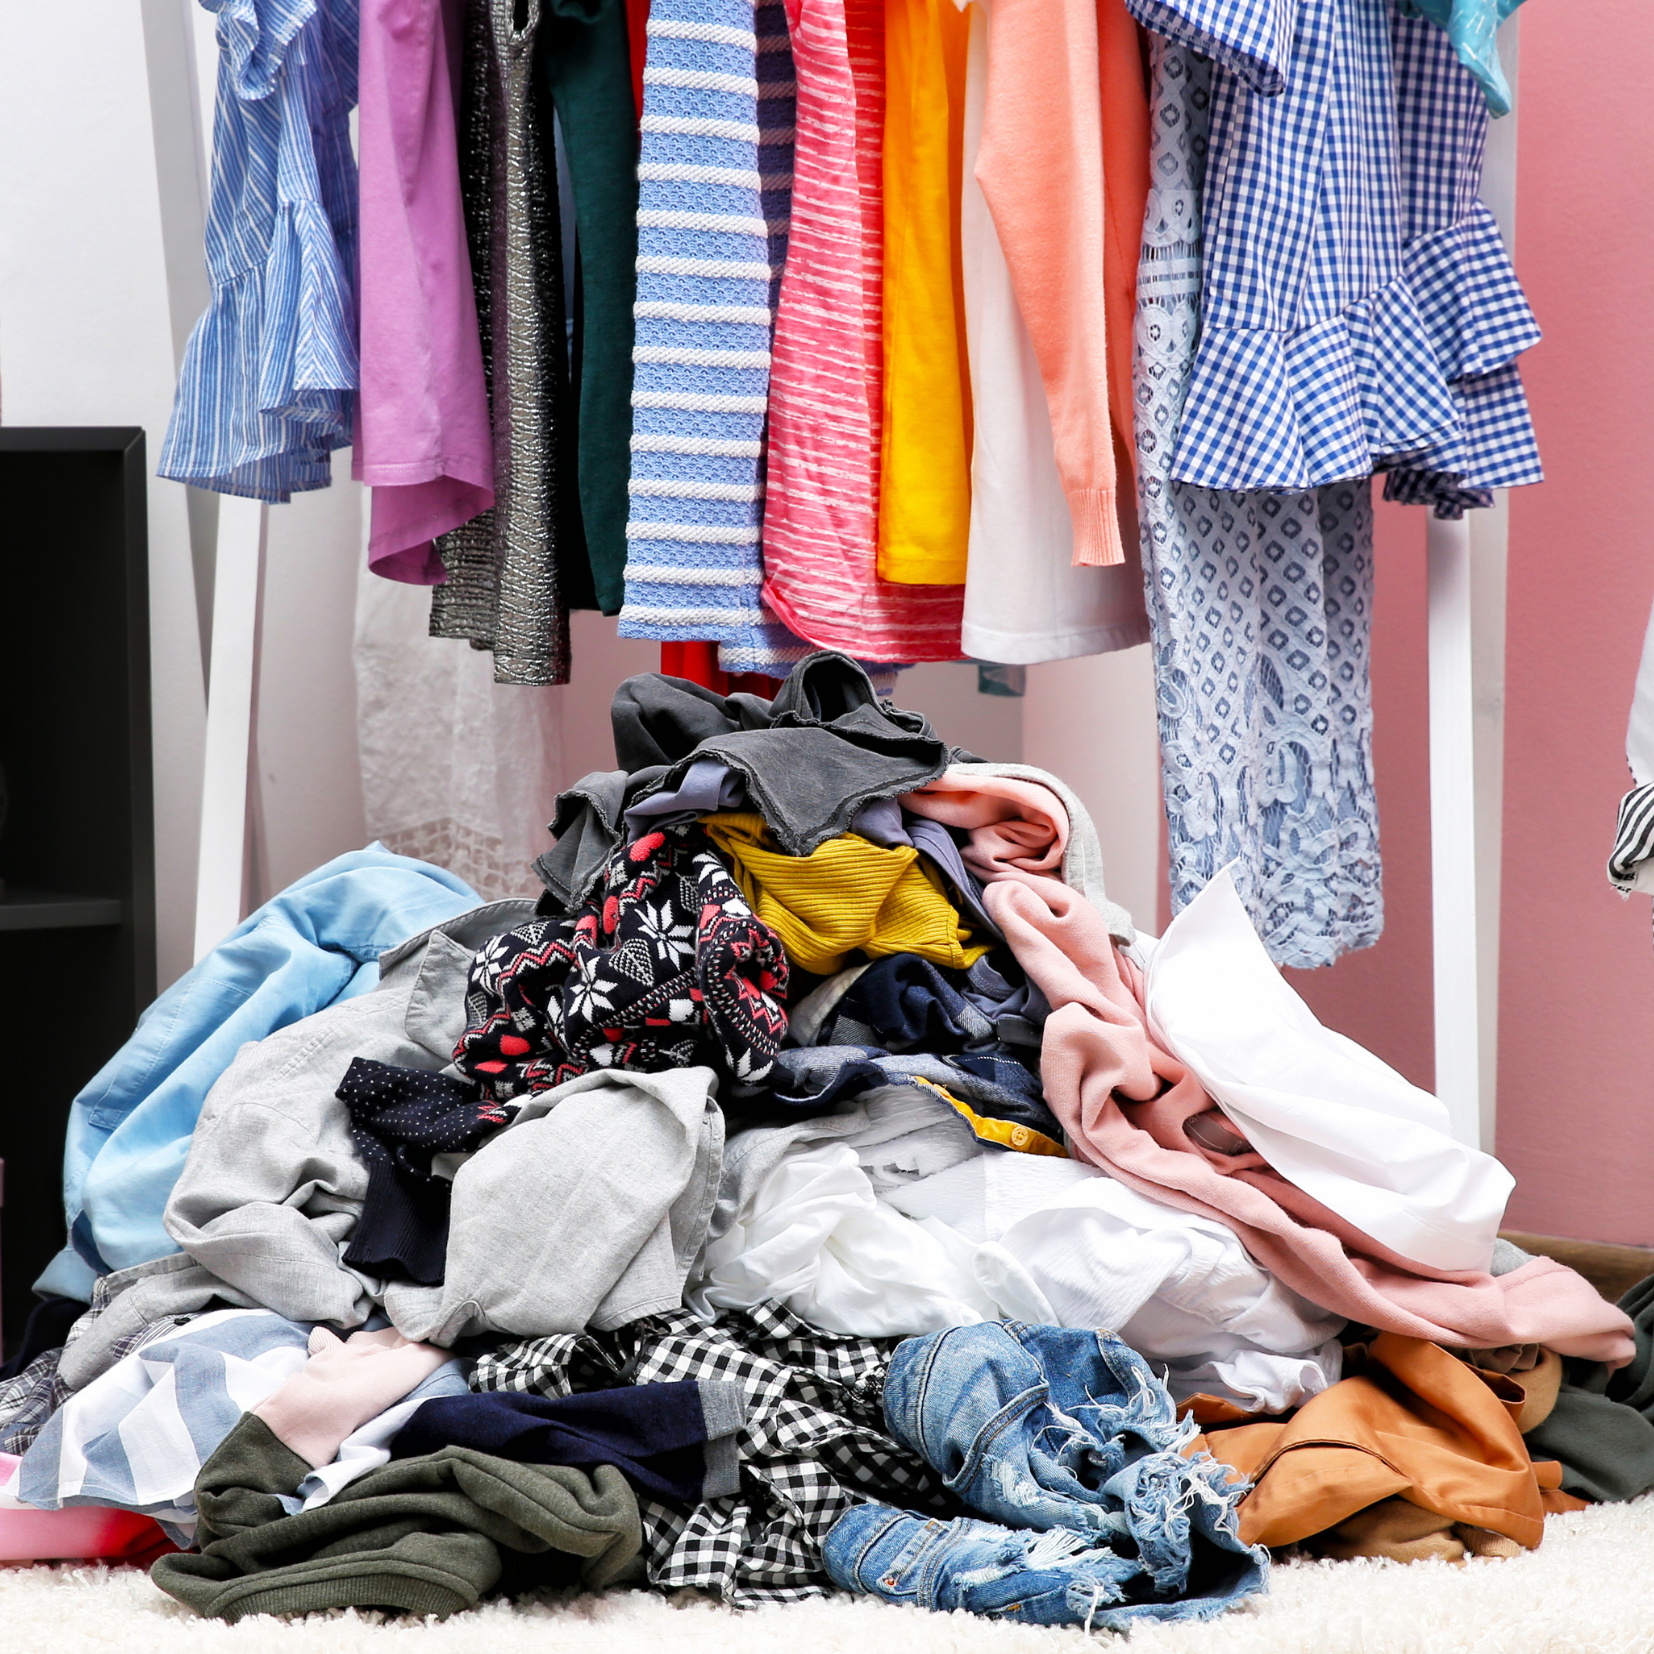 Pile of clothes depicting Weight & Body Concerns